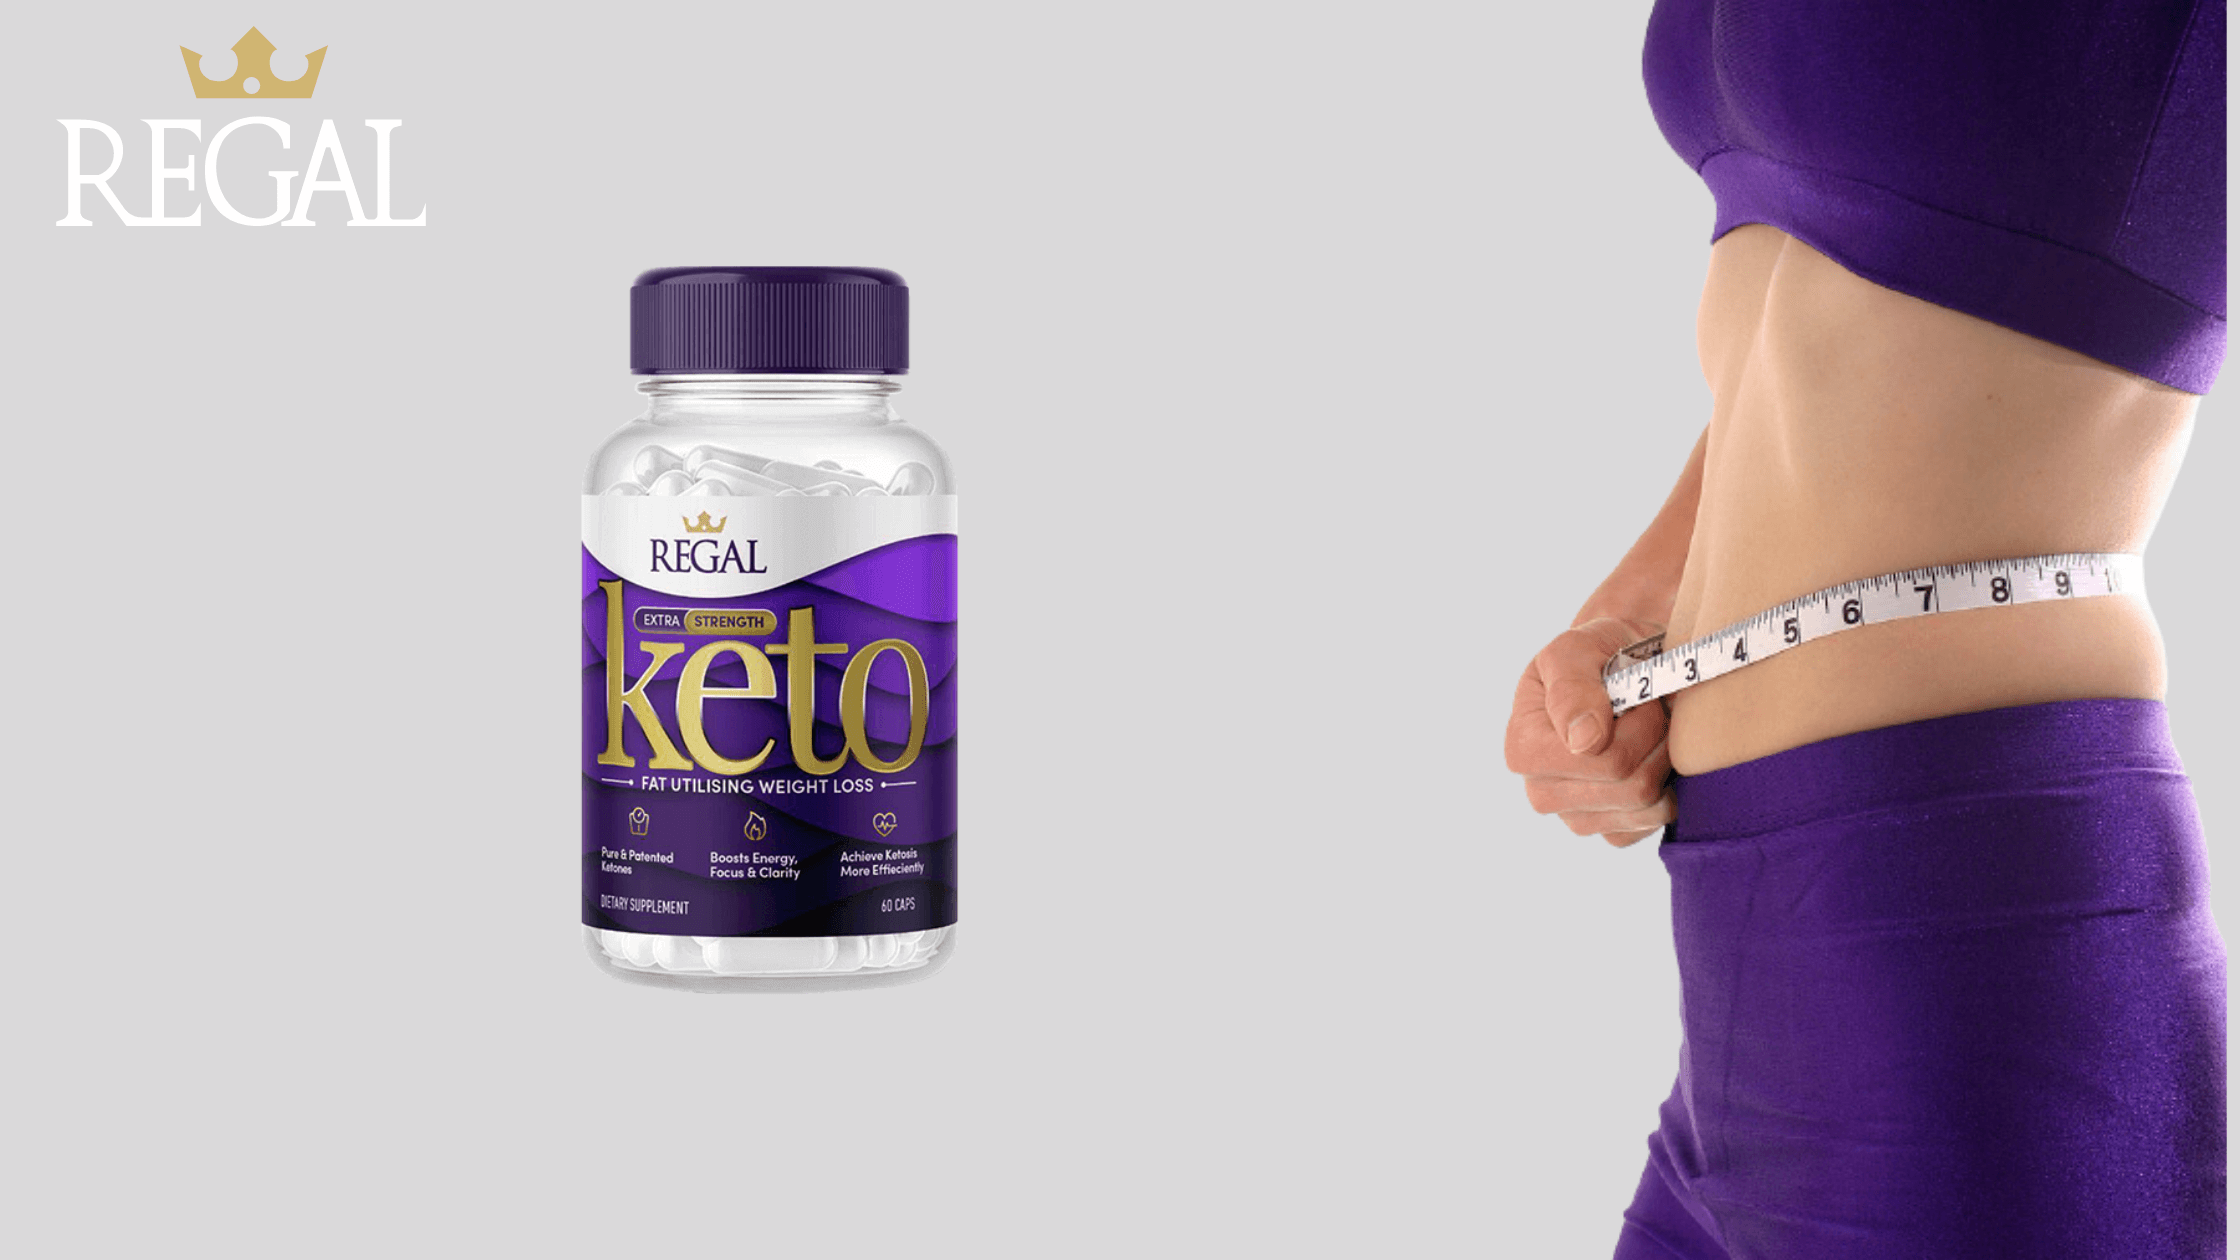 Regal Keto Reviews 2022 &amp; Price Update – Does It Work Or...